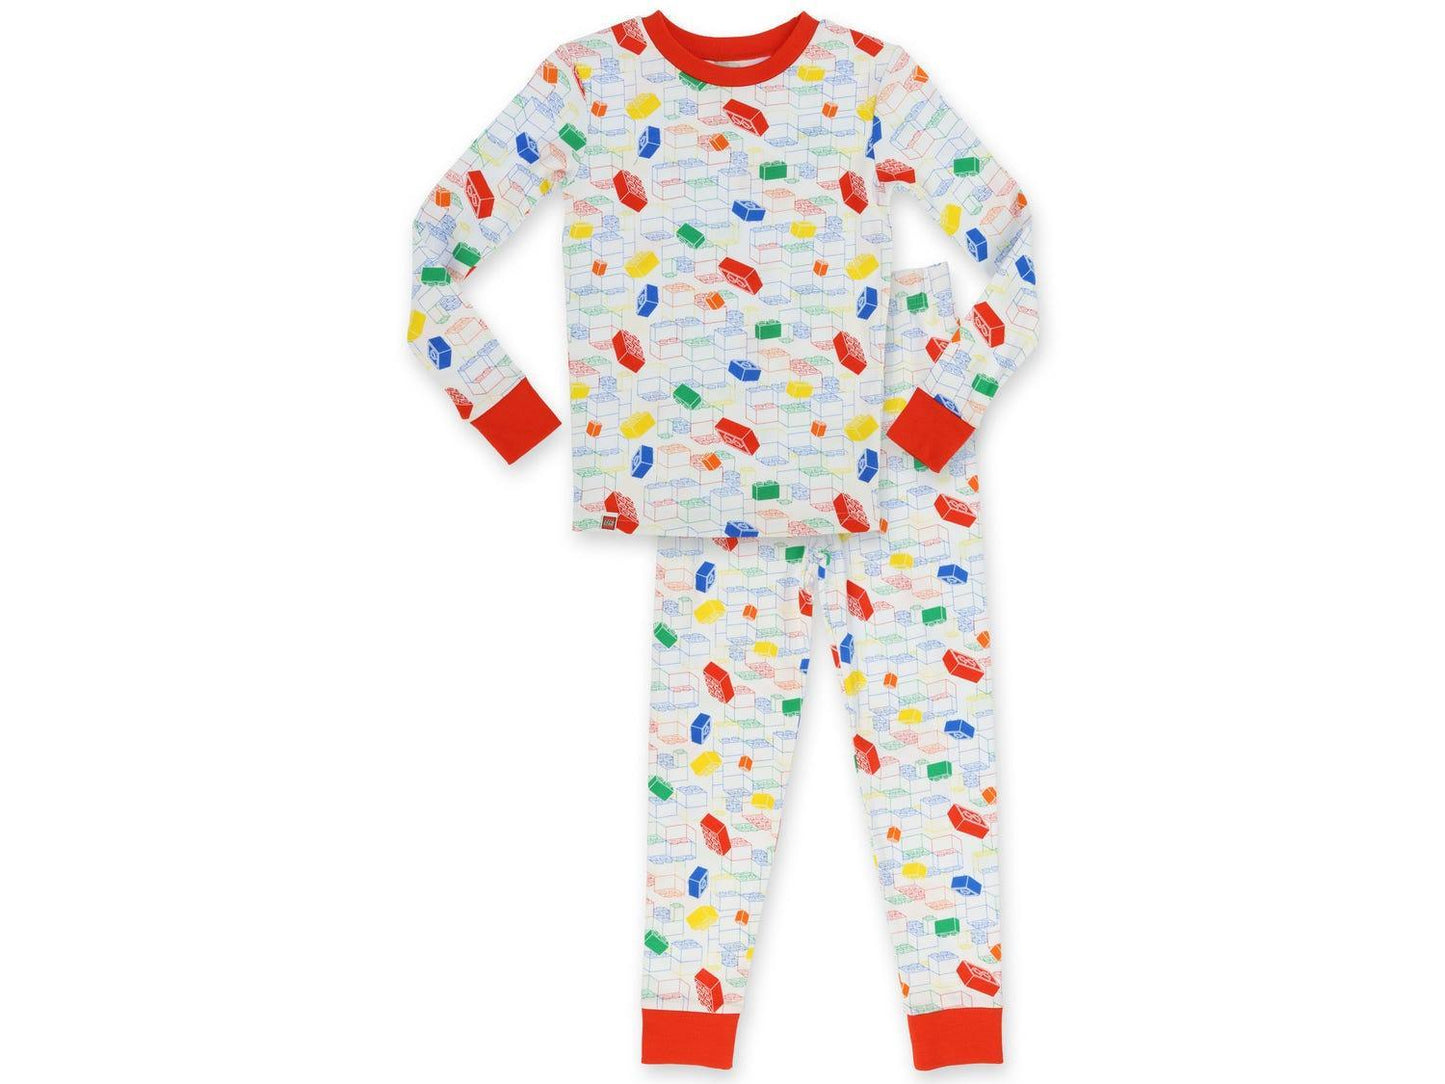 LEGO Red White T Shirt and Pants 2 Piece Set 5007649 Gear LEGO Gear @ 2TTOYS LEGO €. 34.49